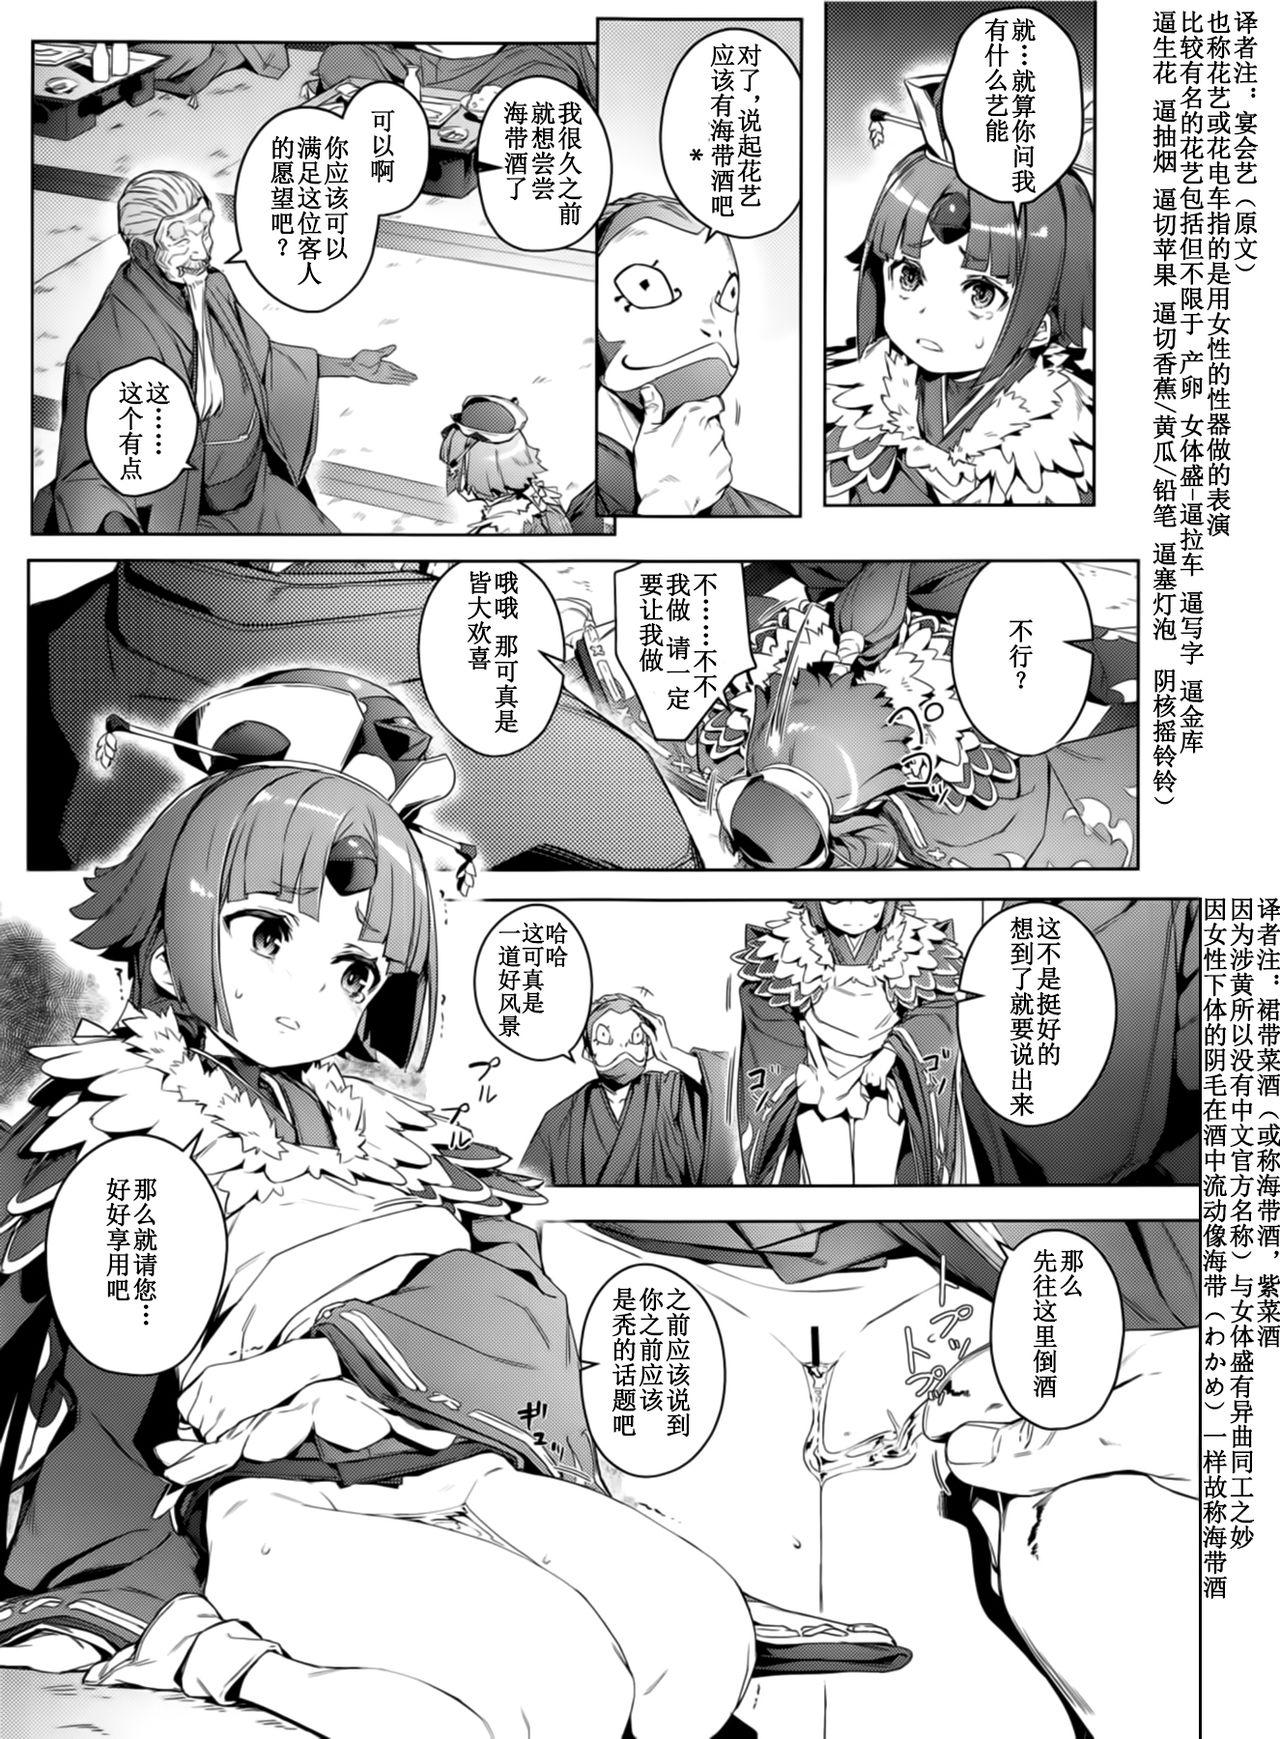 Inked Suzume no Namida - Fate grand order Whipping - Page 7